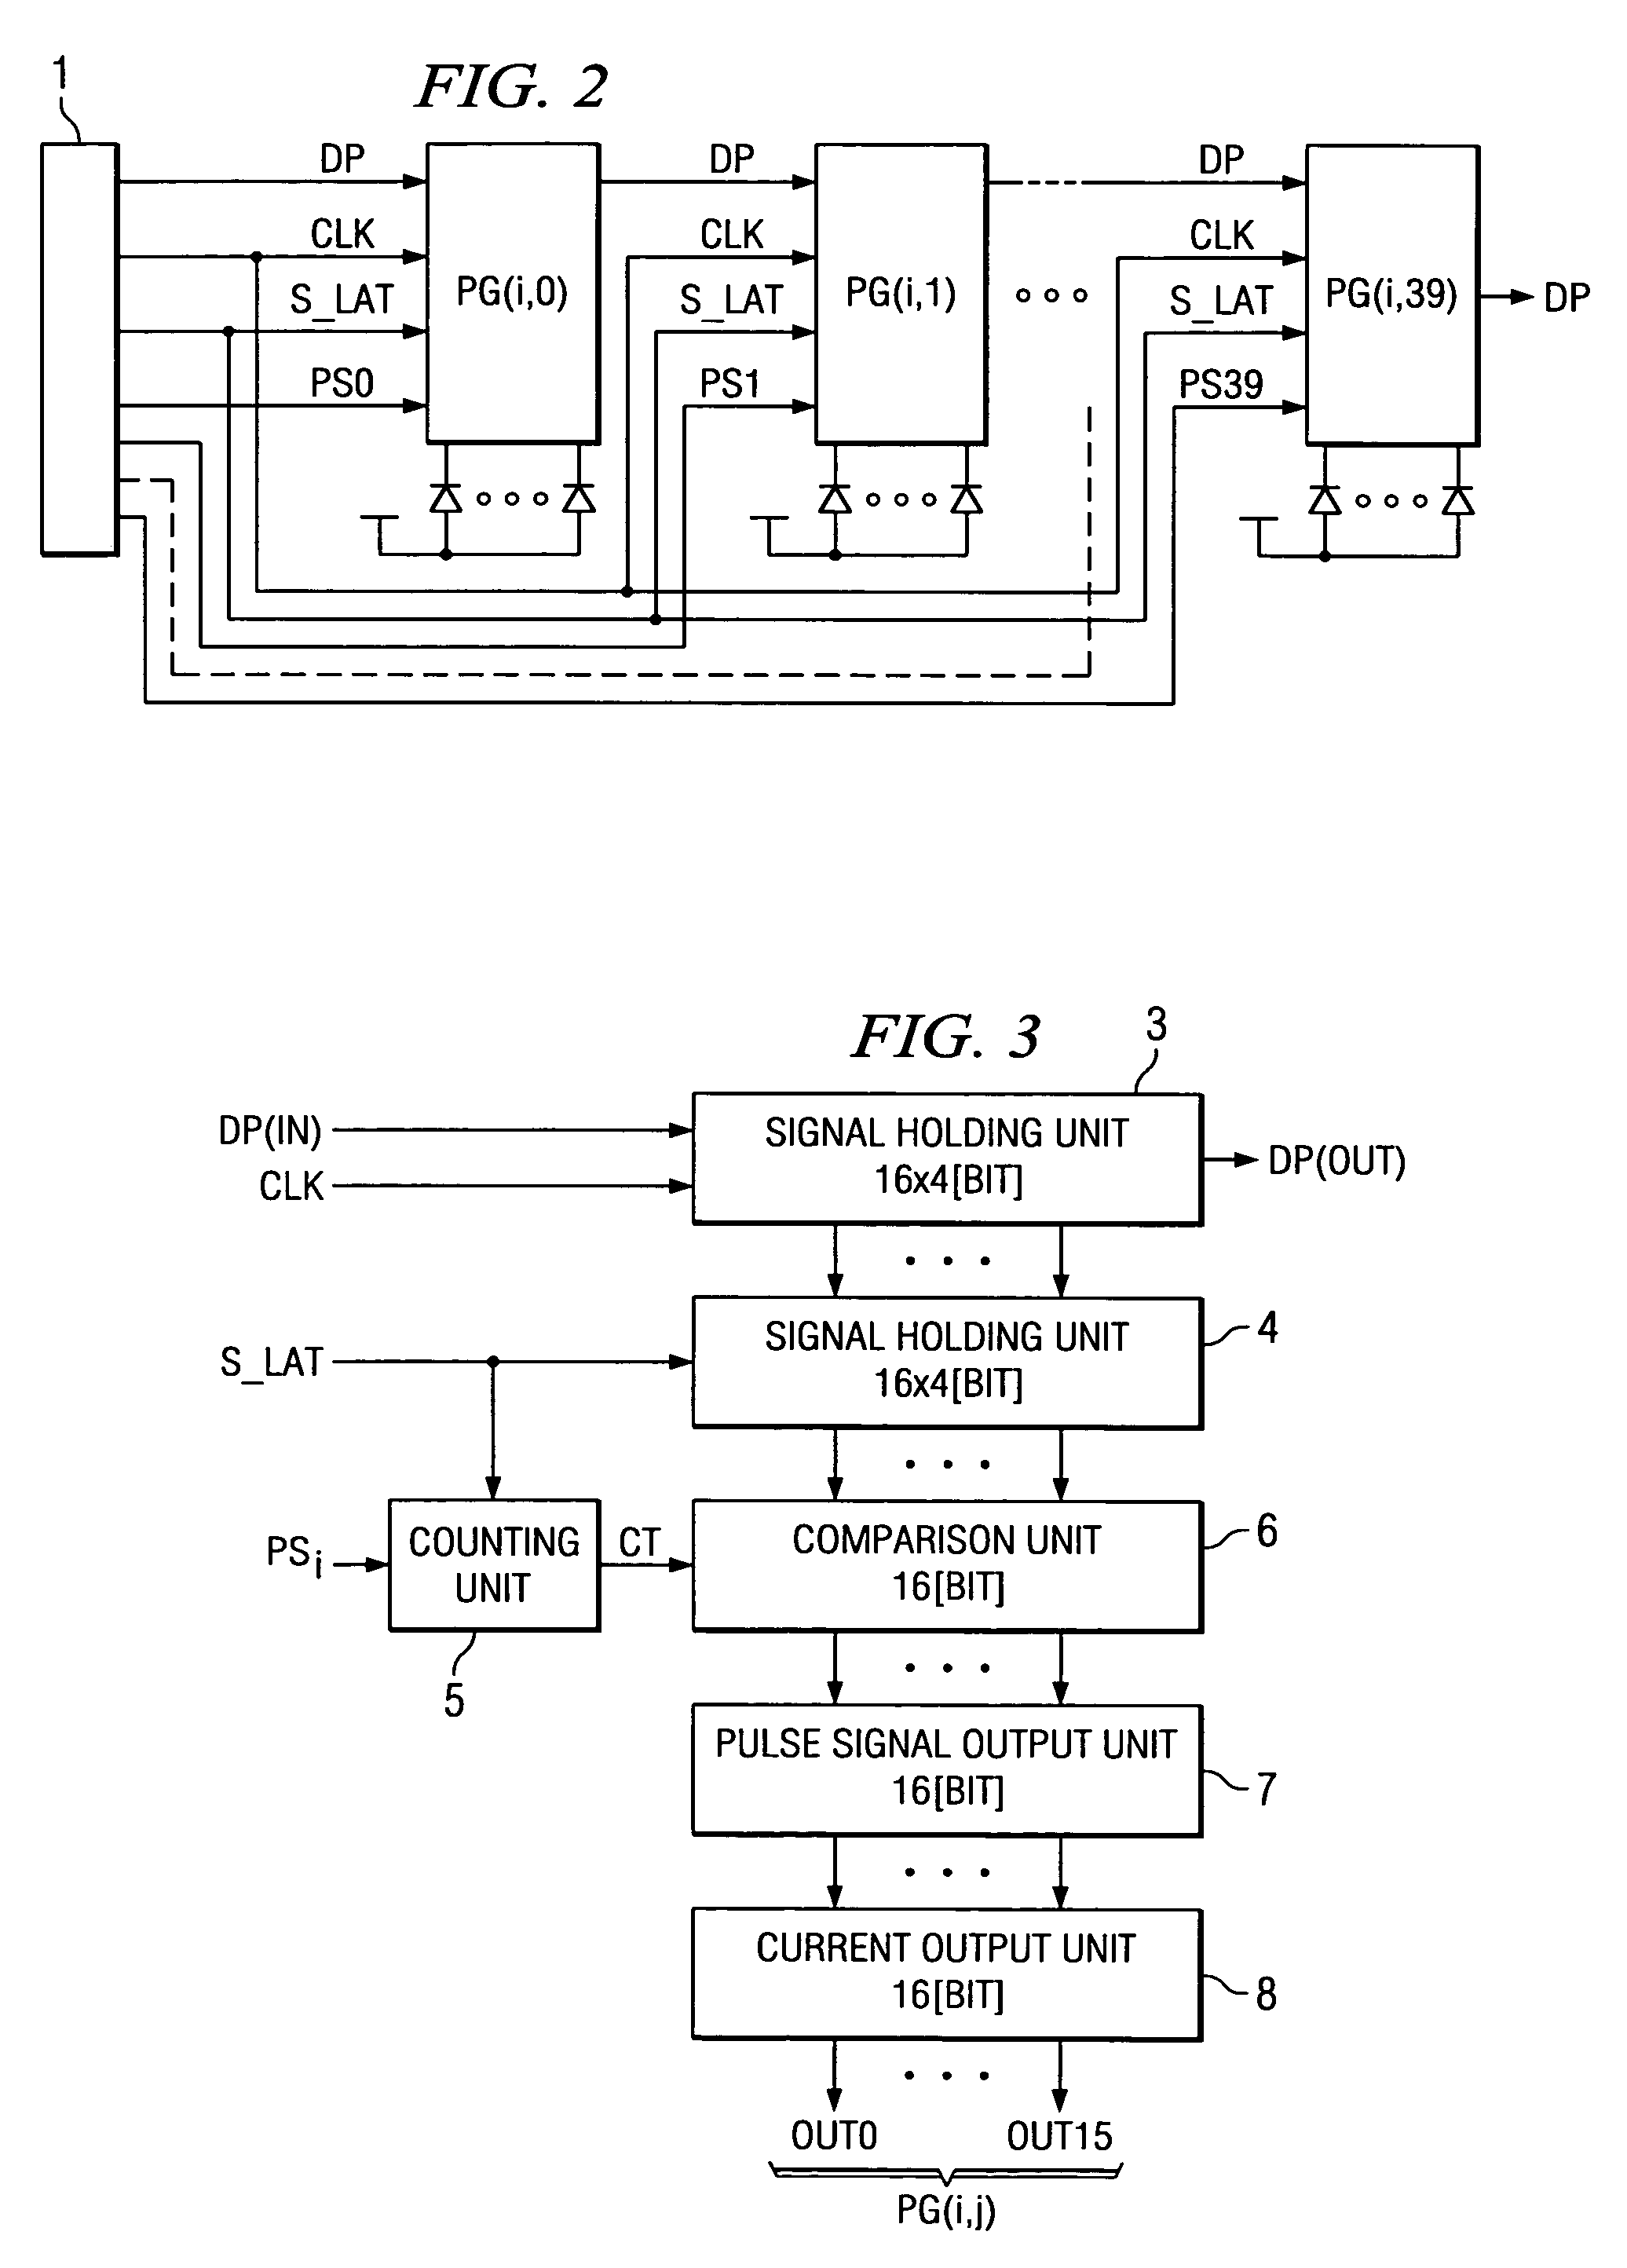 Pulse signal generator and display device